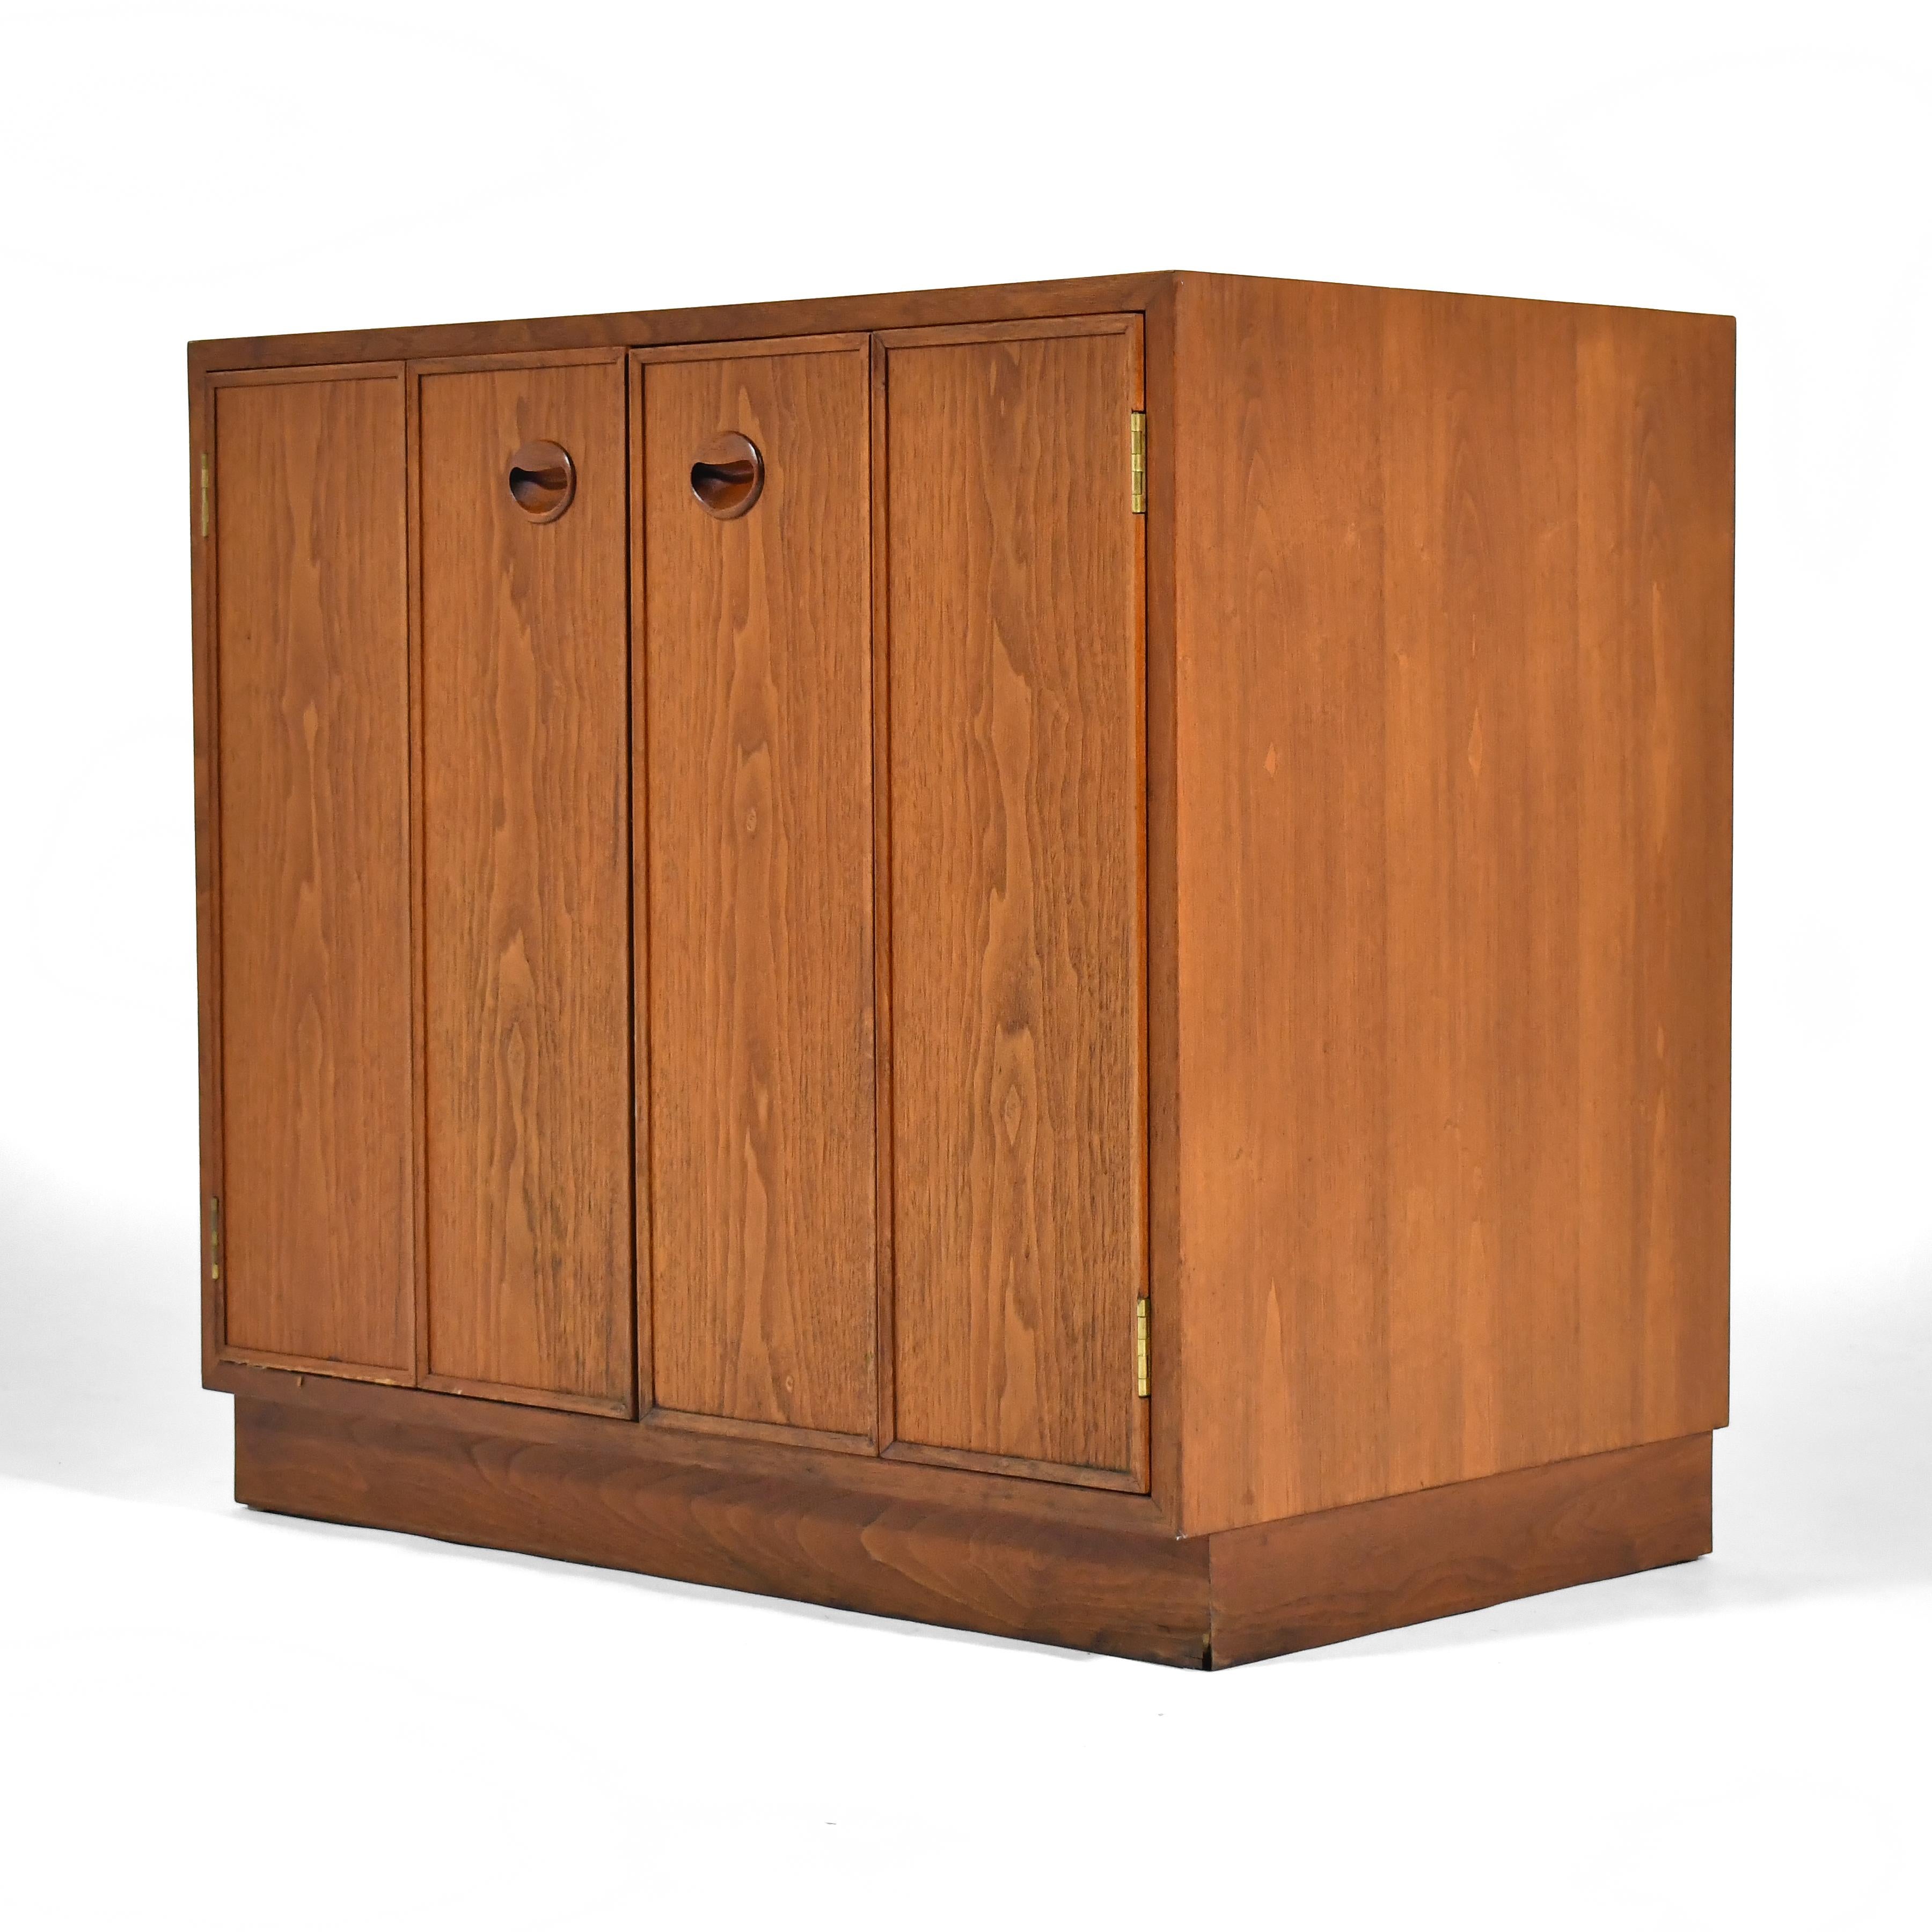 Edward Wormley Walnut Cabinet by Dunbar In Good Condition For Sale In Highland, IN